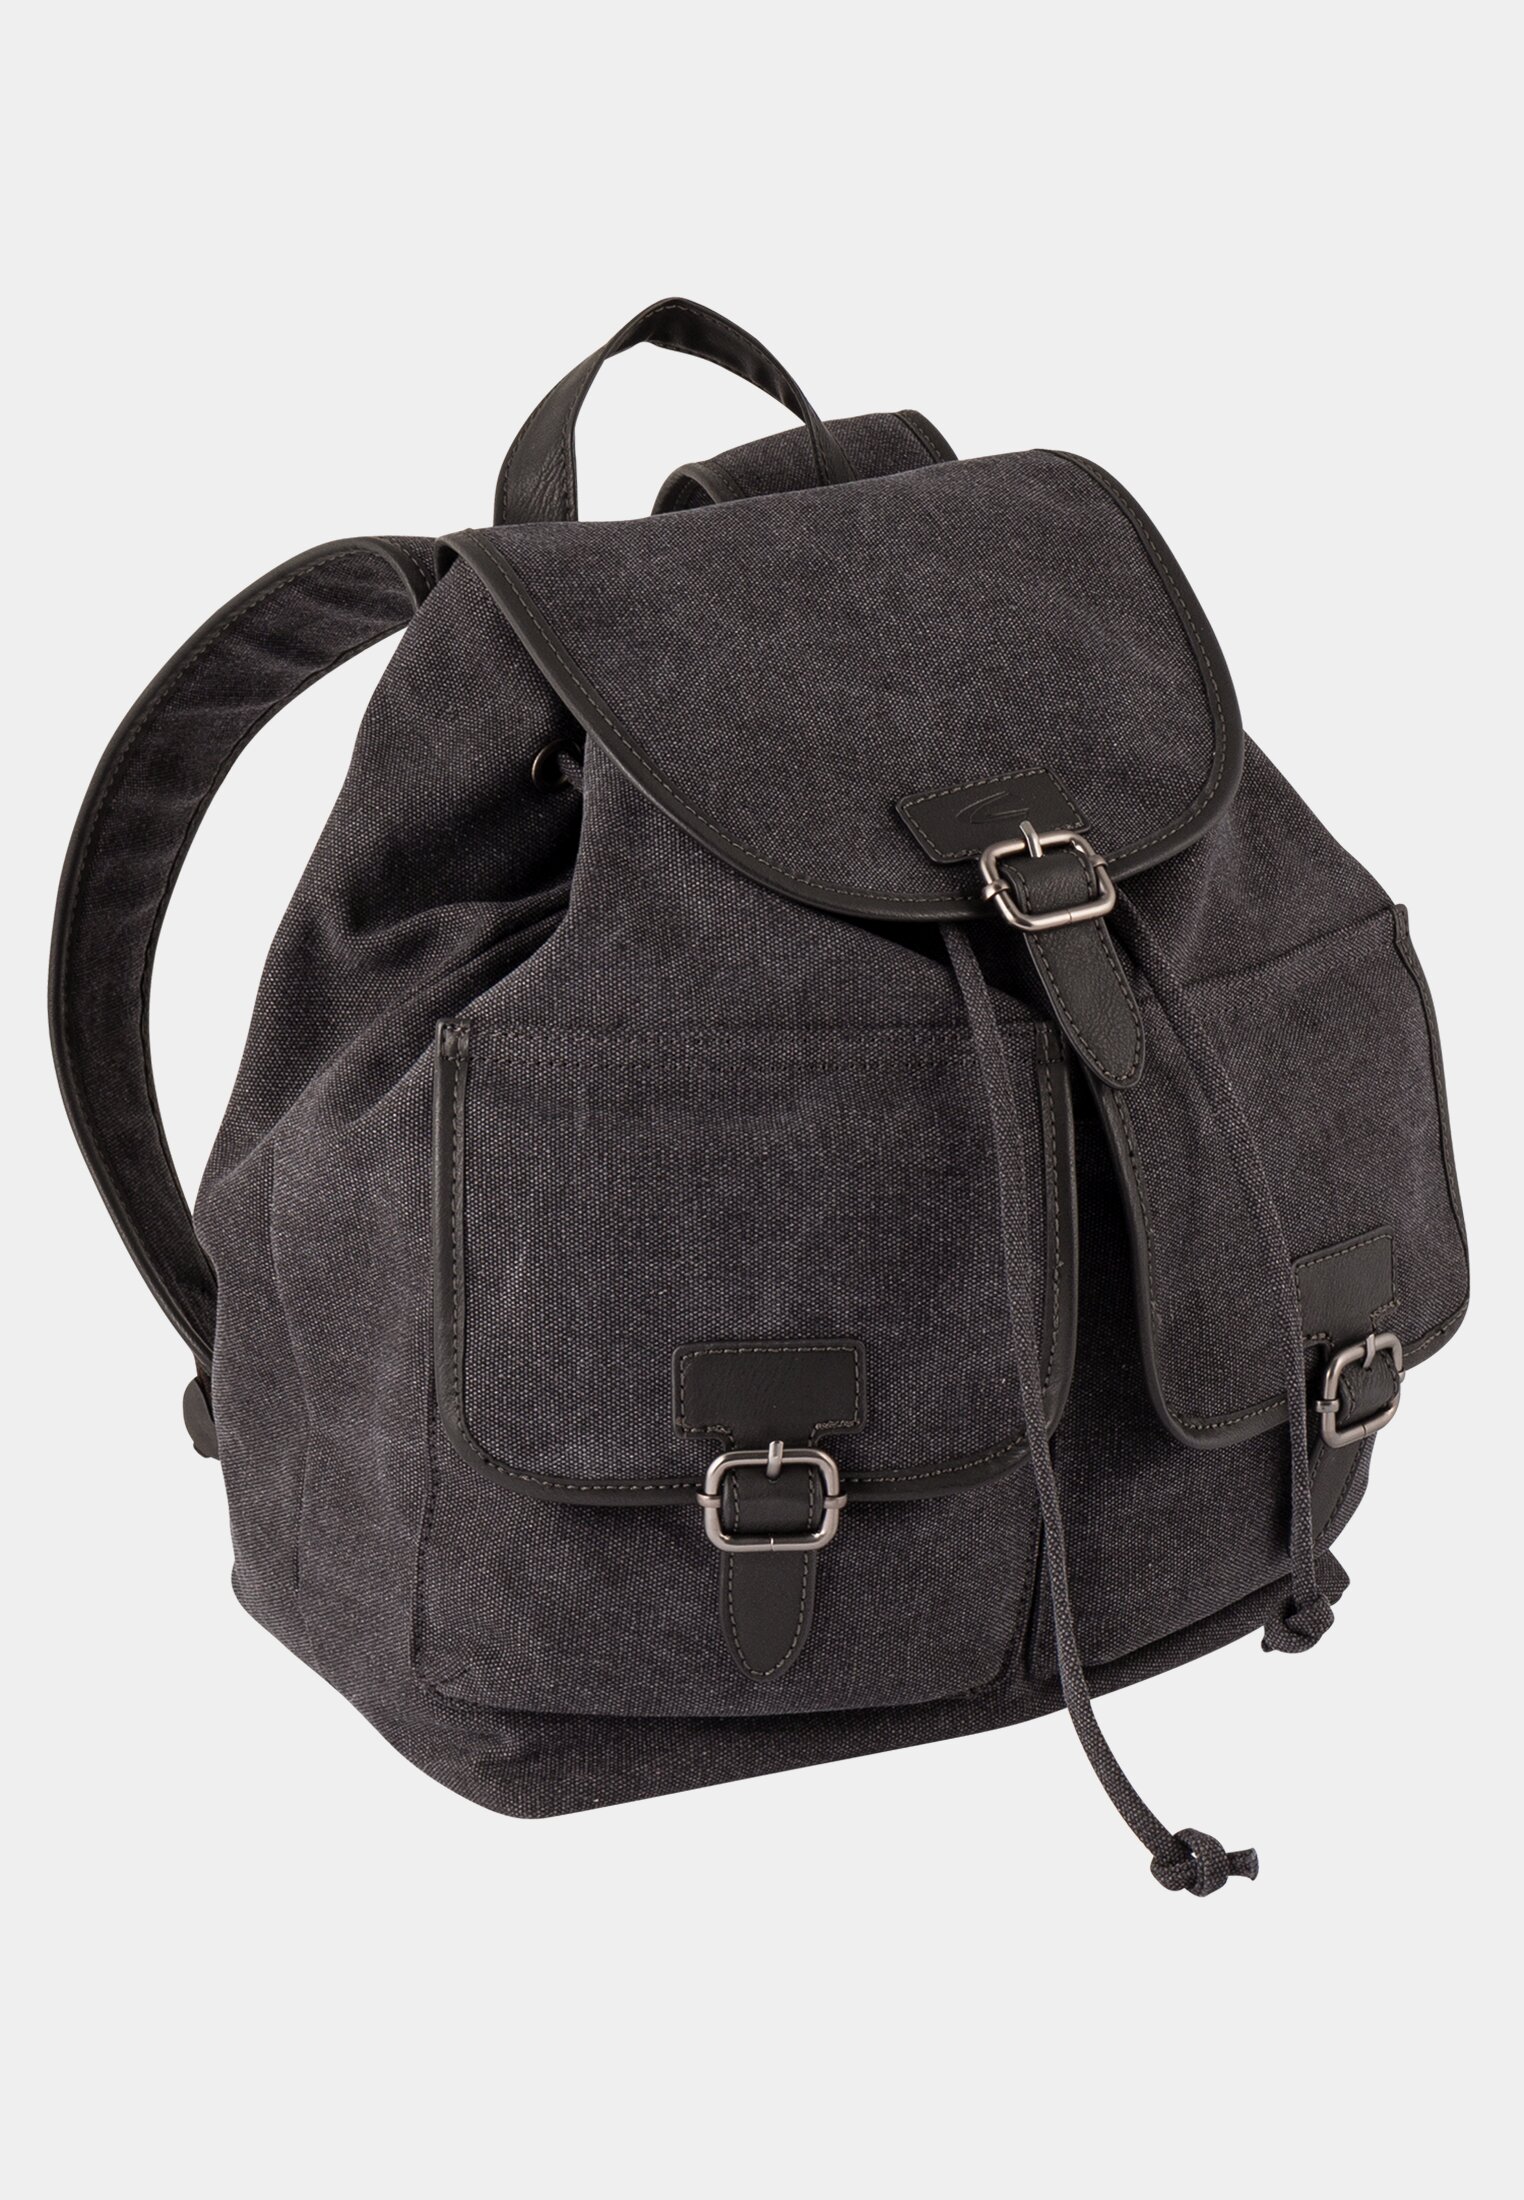 Camel Active MOUNTAIN backpack made from washed canvas